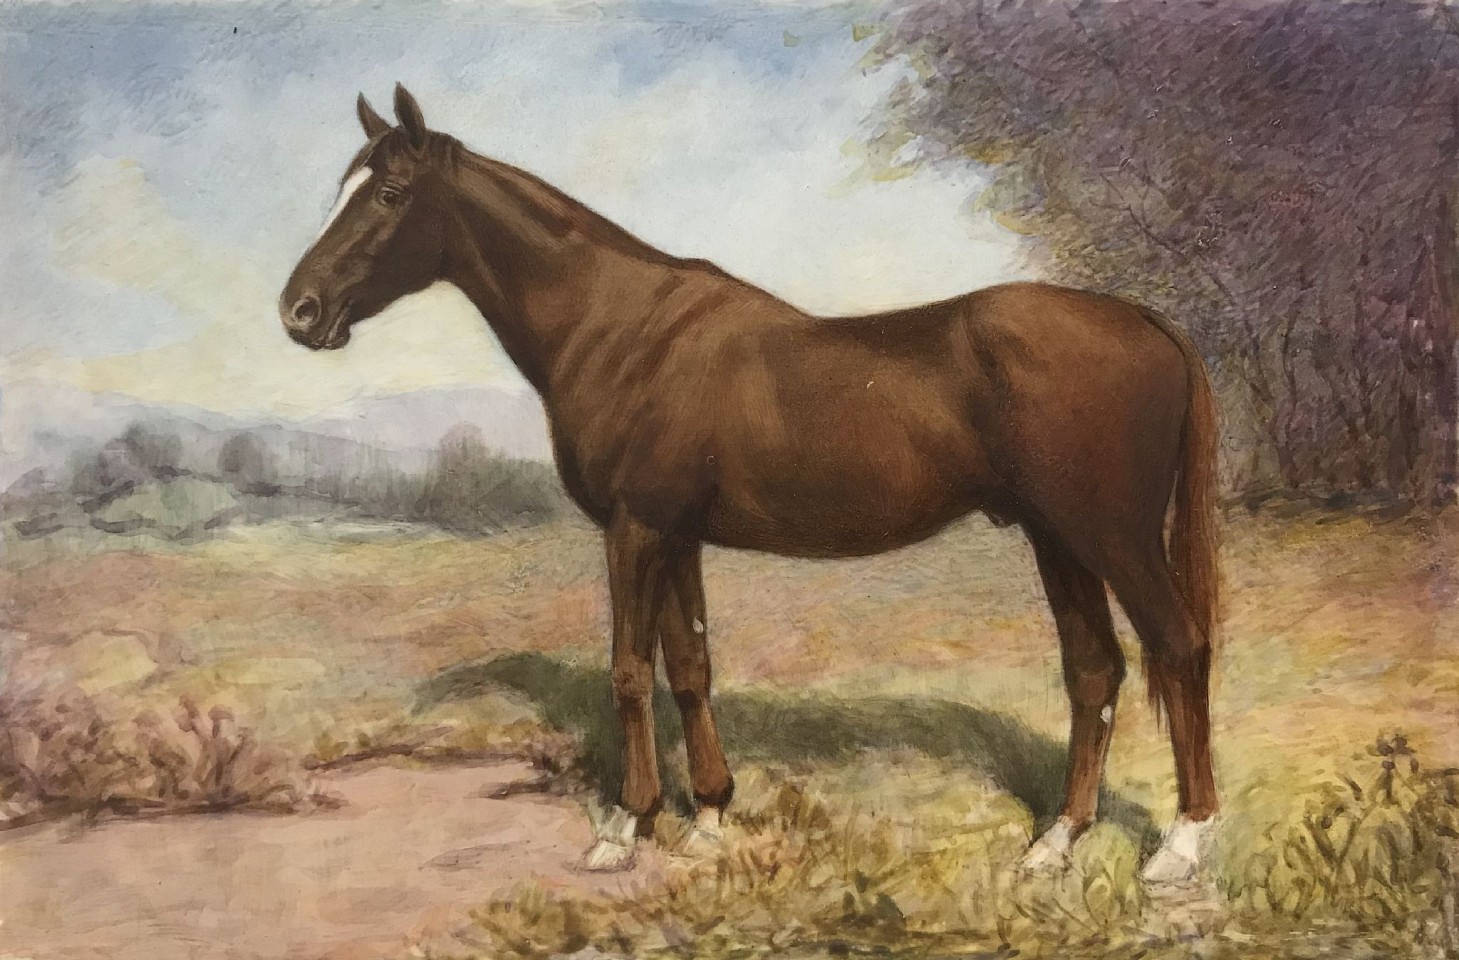 J. Phillip Schmand, Portrait of a Chestnut Horse
watercolor on ivory, 4" x 6"
unsigned
JWC 0119.75
$500